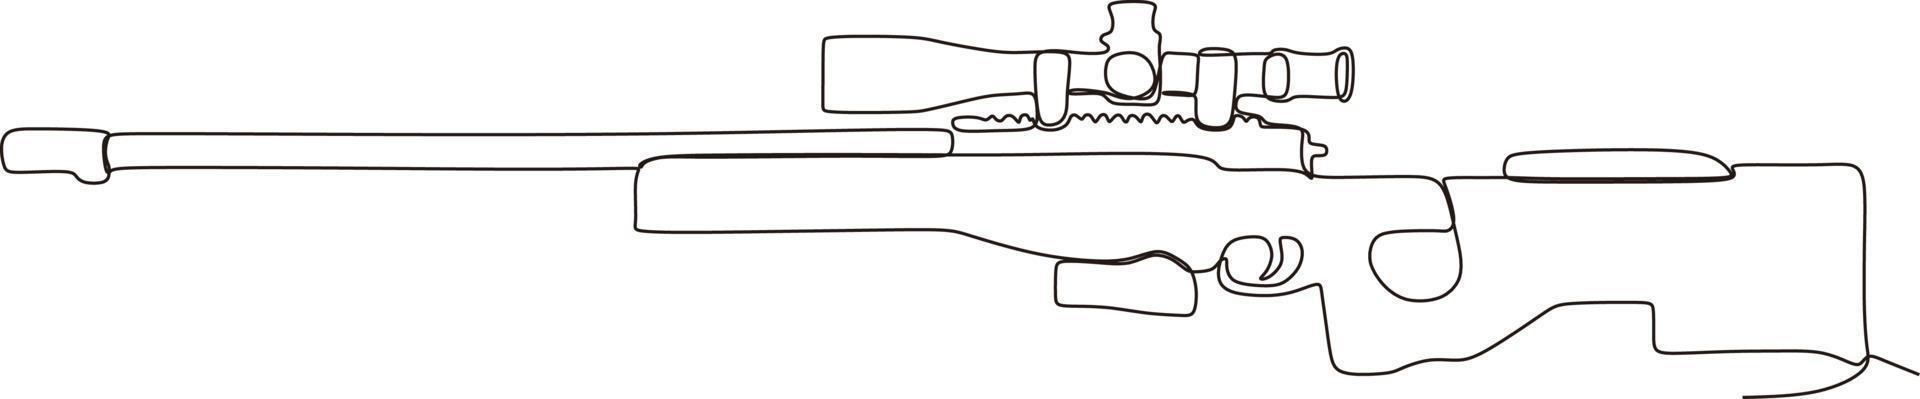 Continuous line drawing of sniper rifle,vector illustration vector